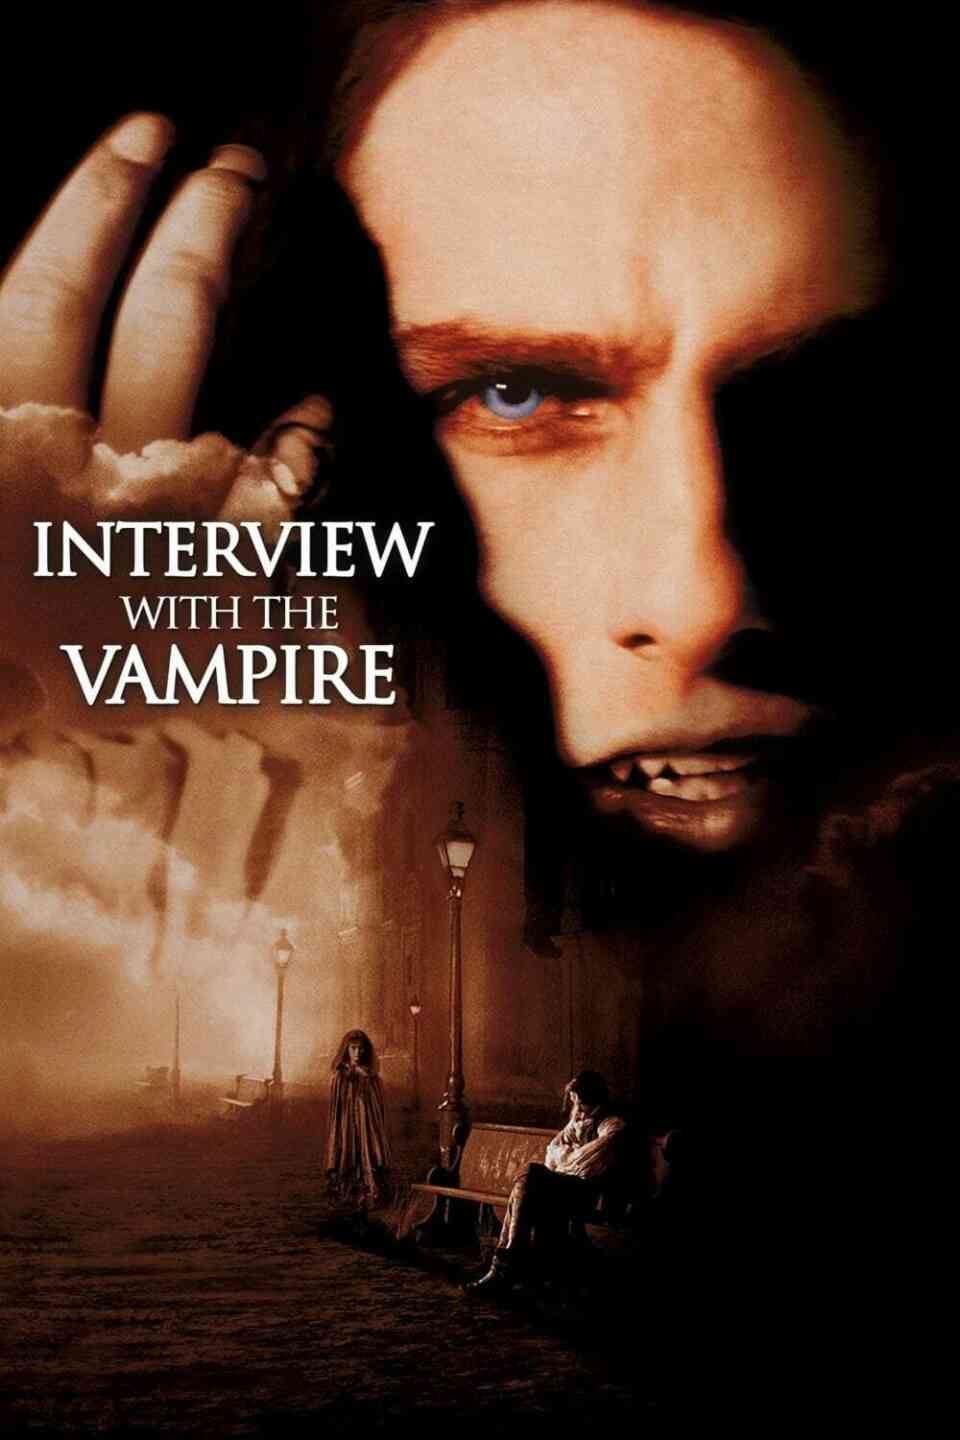 Read Interview with the Vampire screenplay (poster)